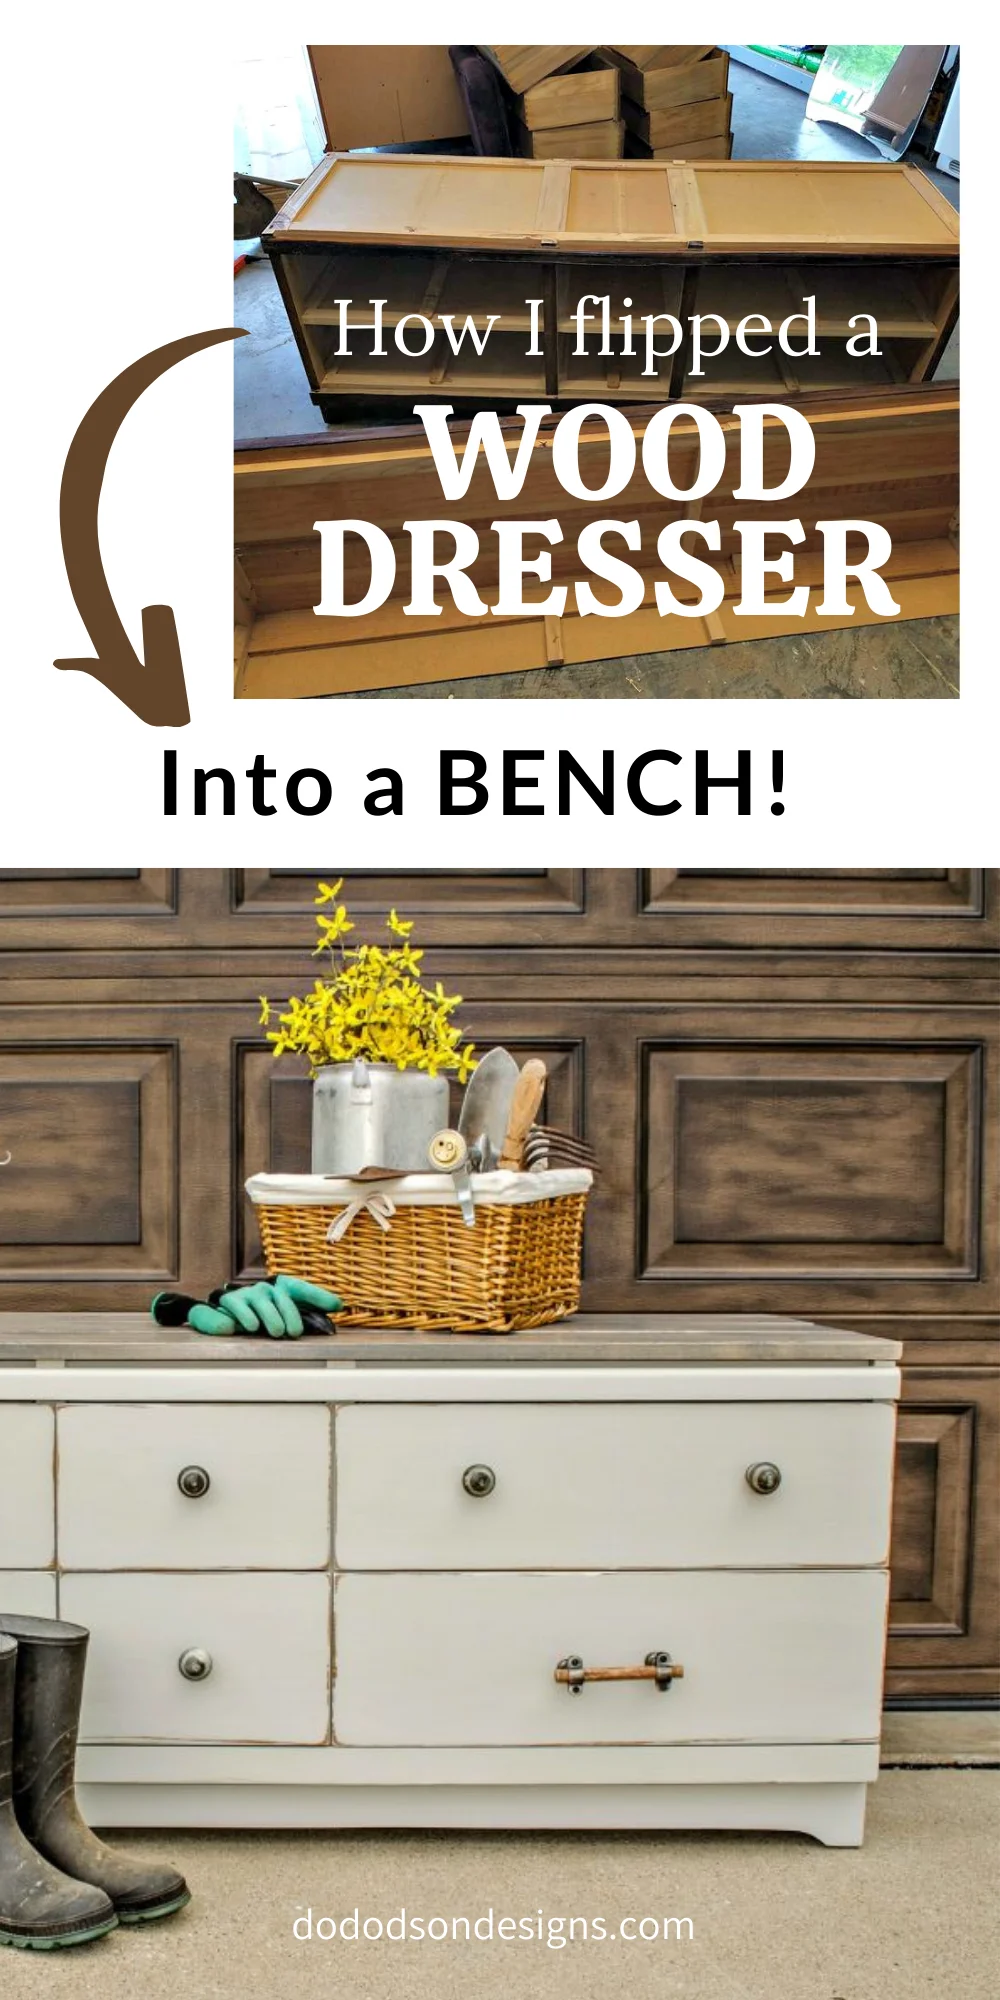 How To Make A Wood Dresser Into A Bench